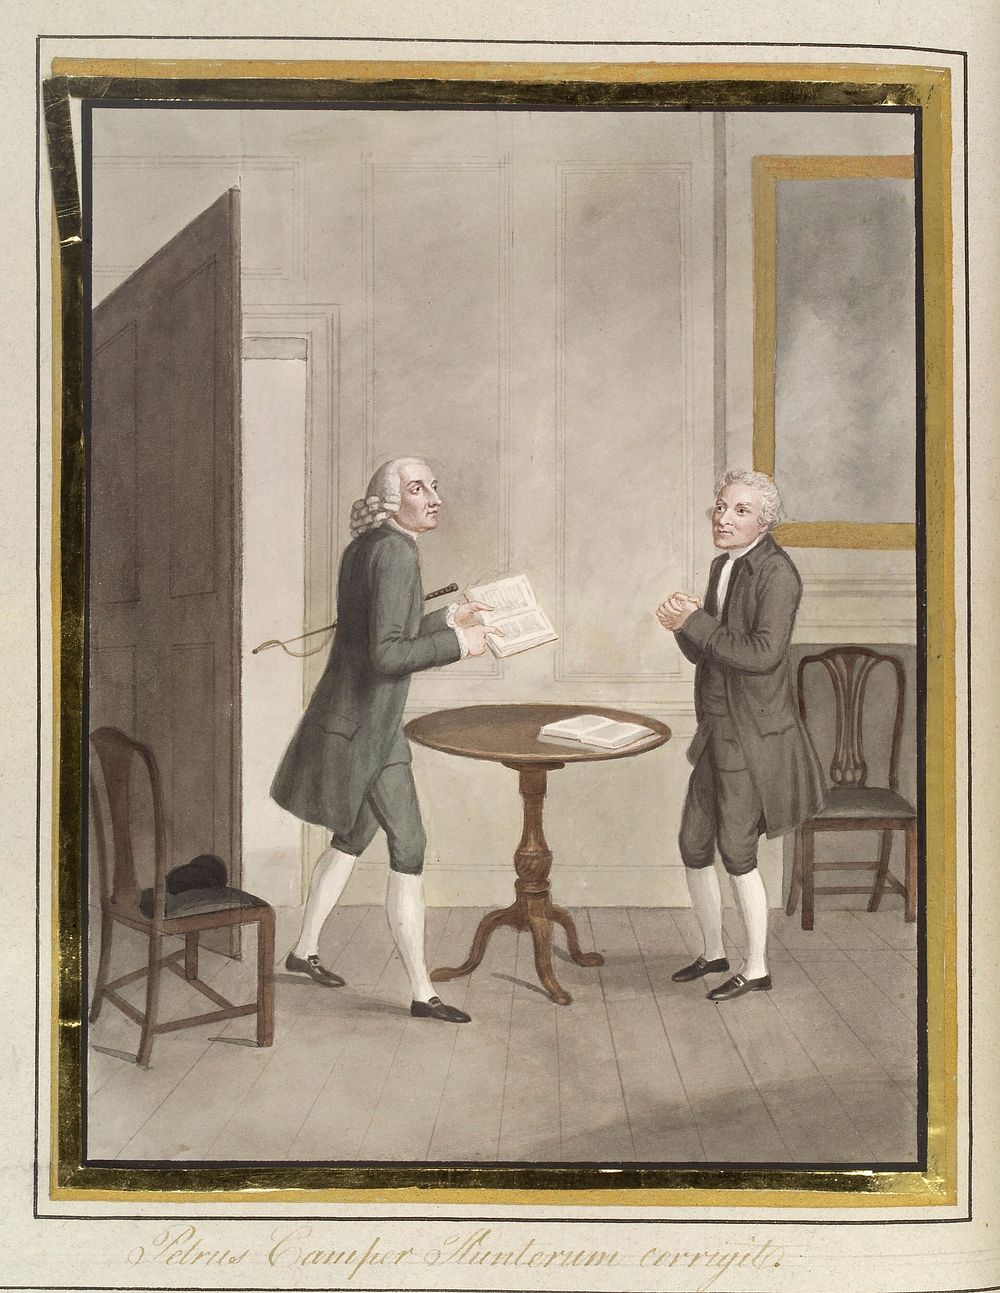 Pieter Camper correcting John Hunter's paper on the hawk. Watercolour attributed to J. Foot, 1822.